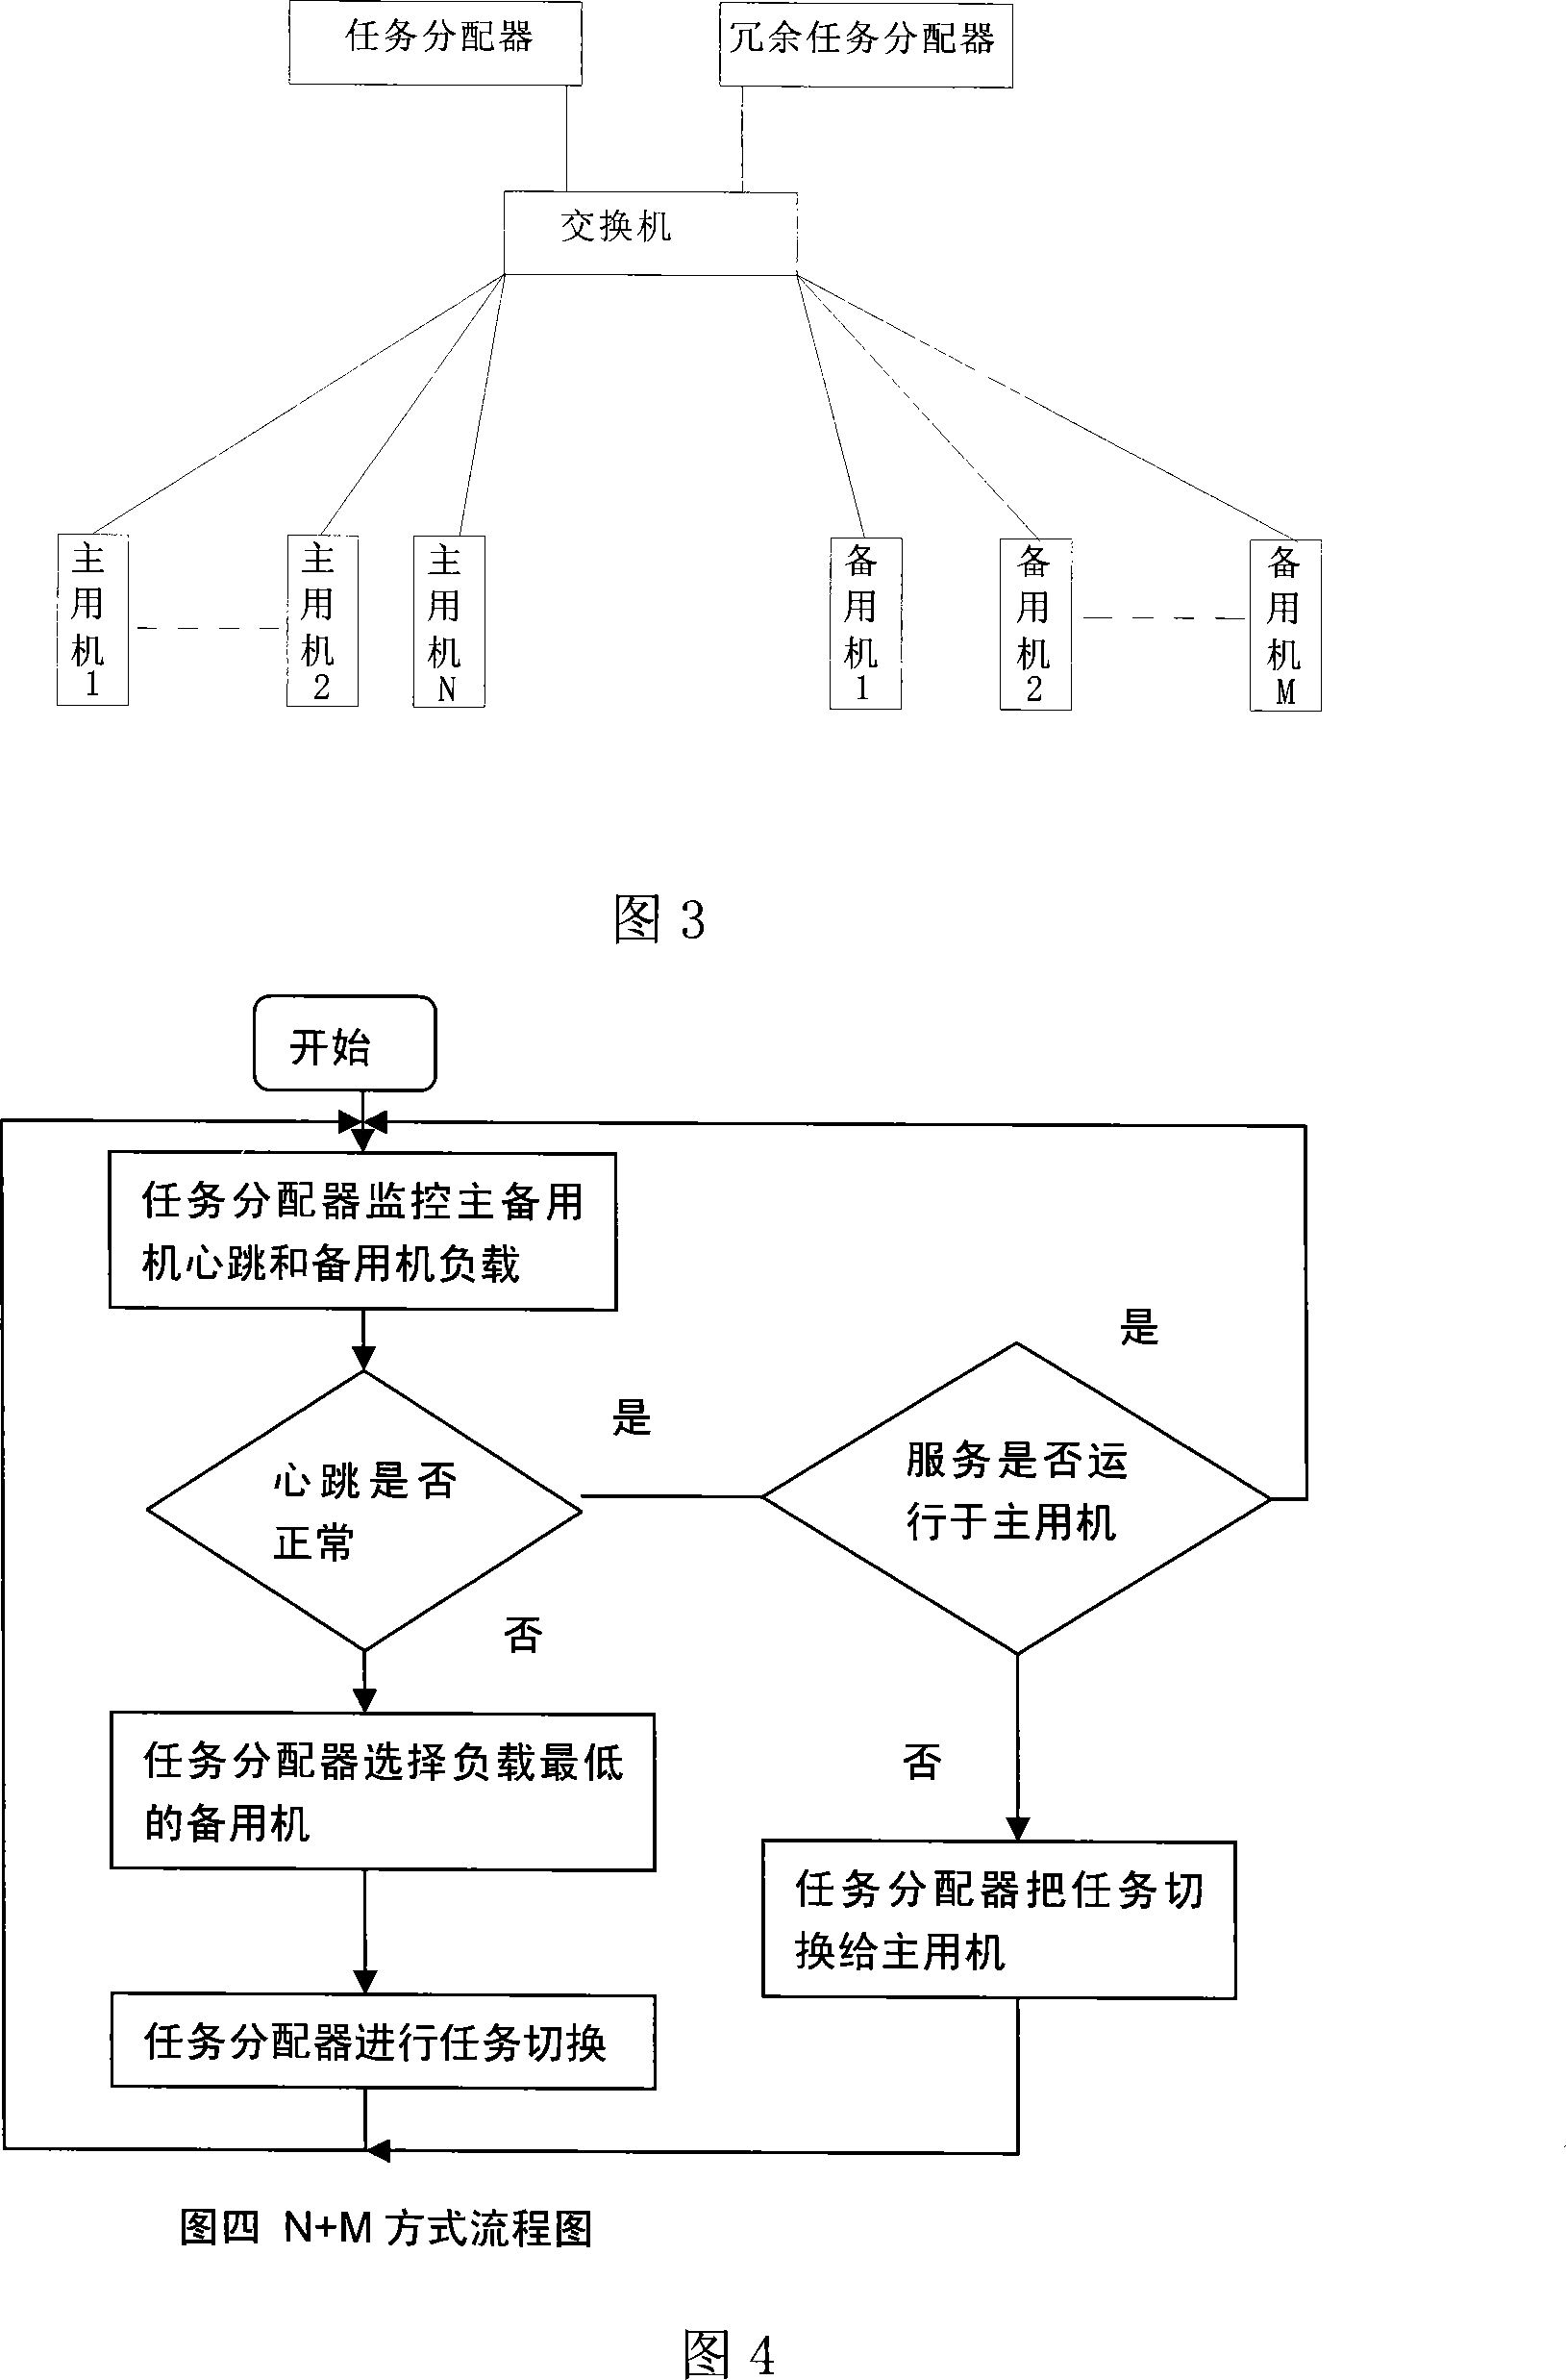 Method of implementing high availability of system in multi-machine surroundings